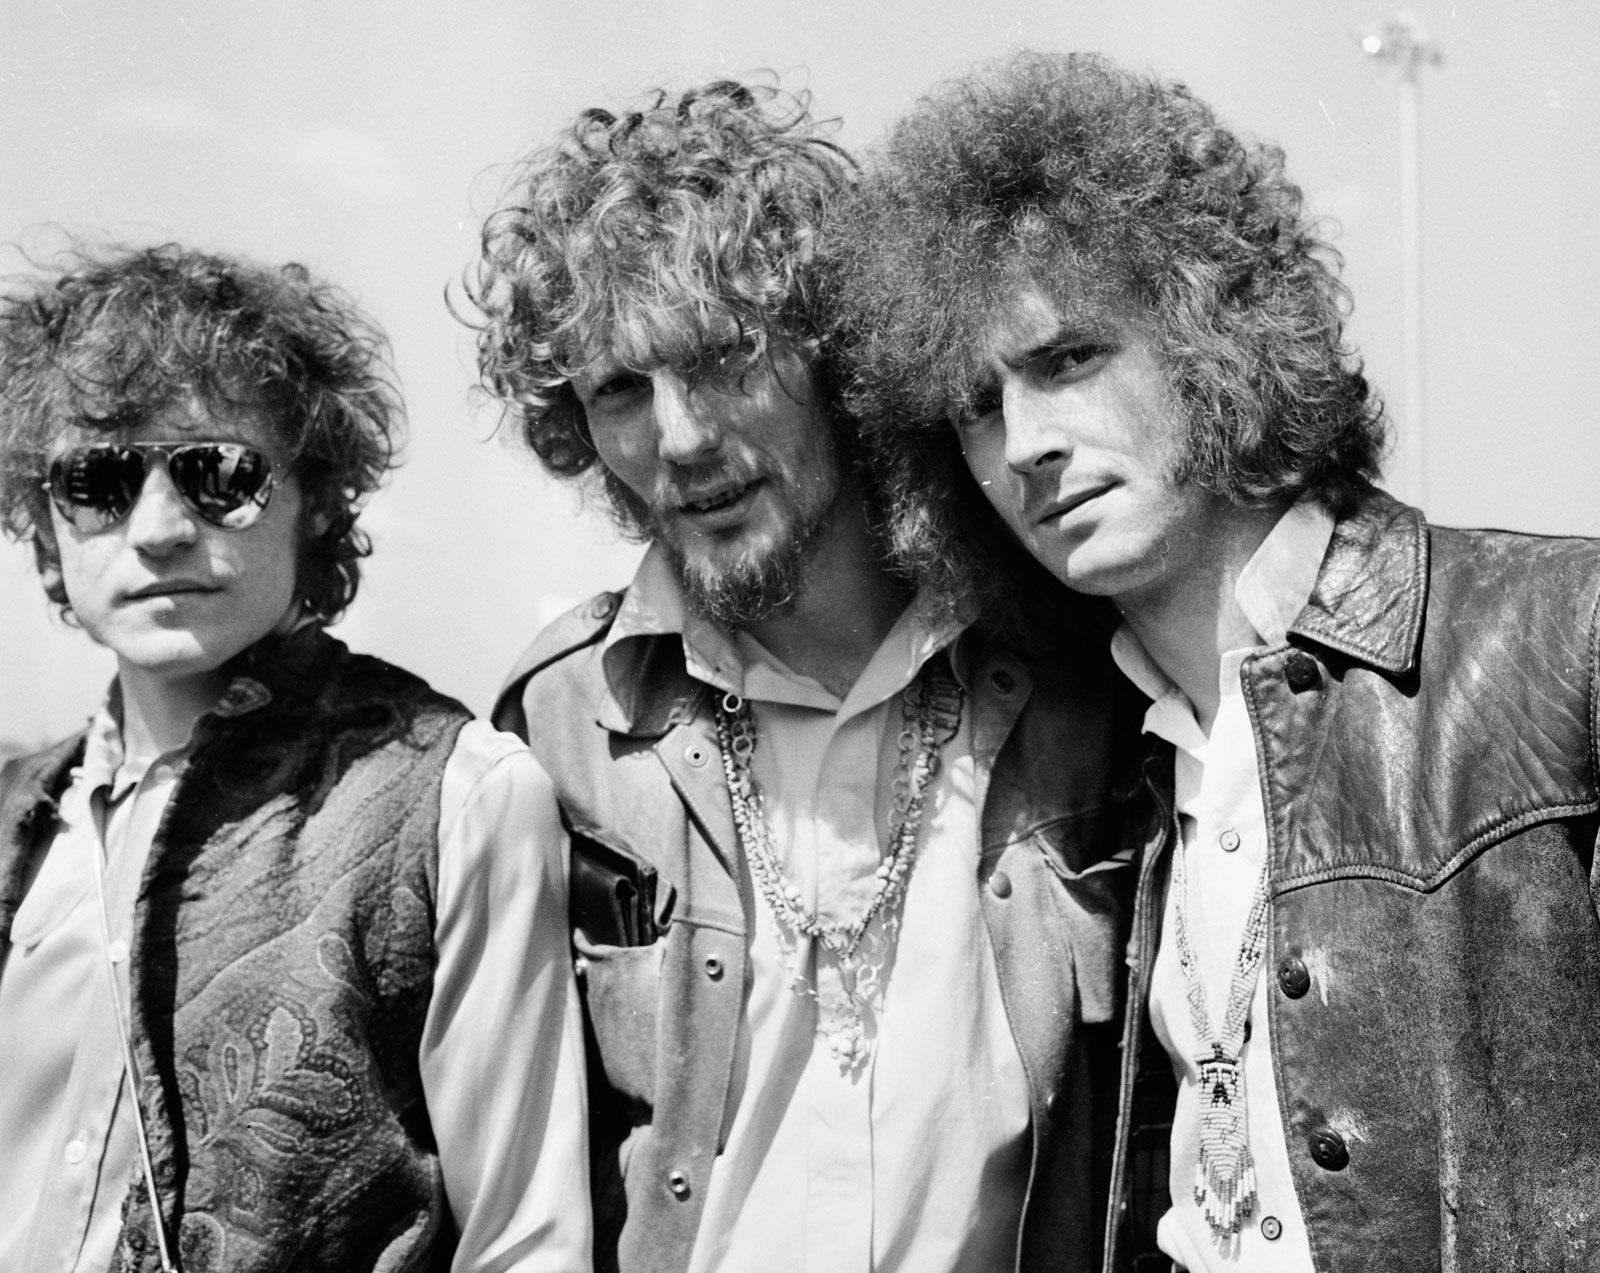 Cream. Members, Albums, & Significance